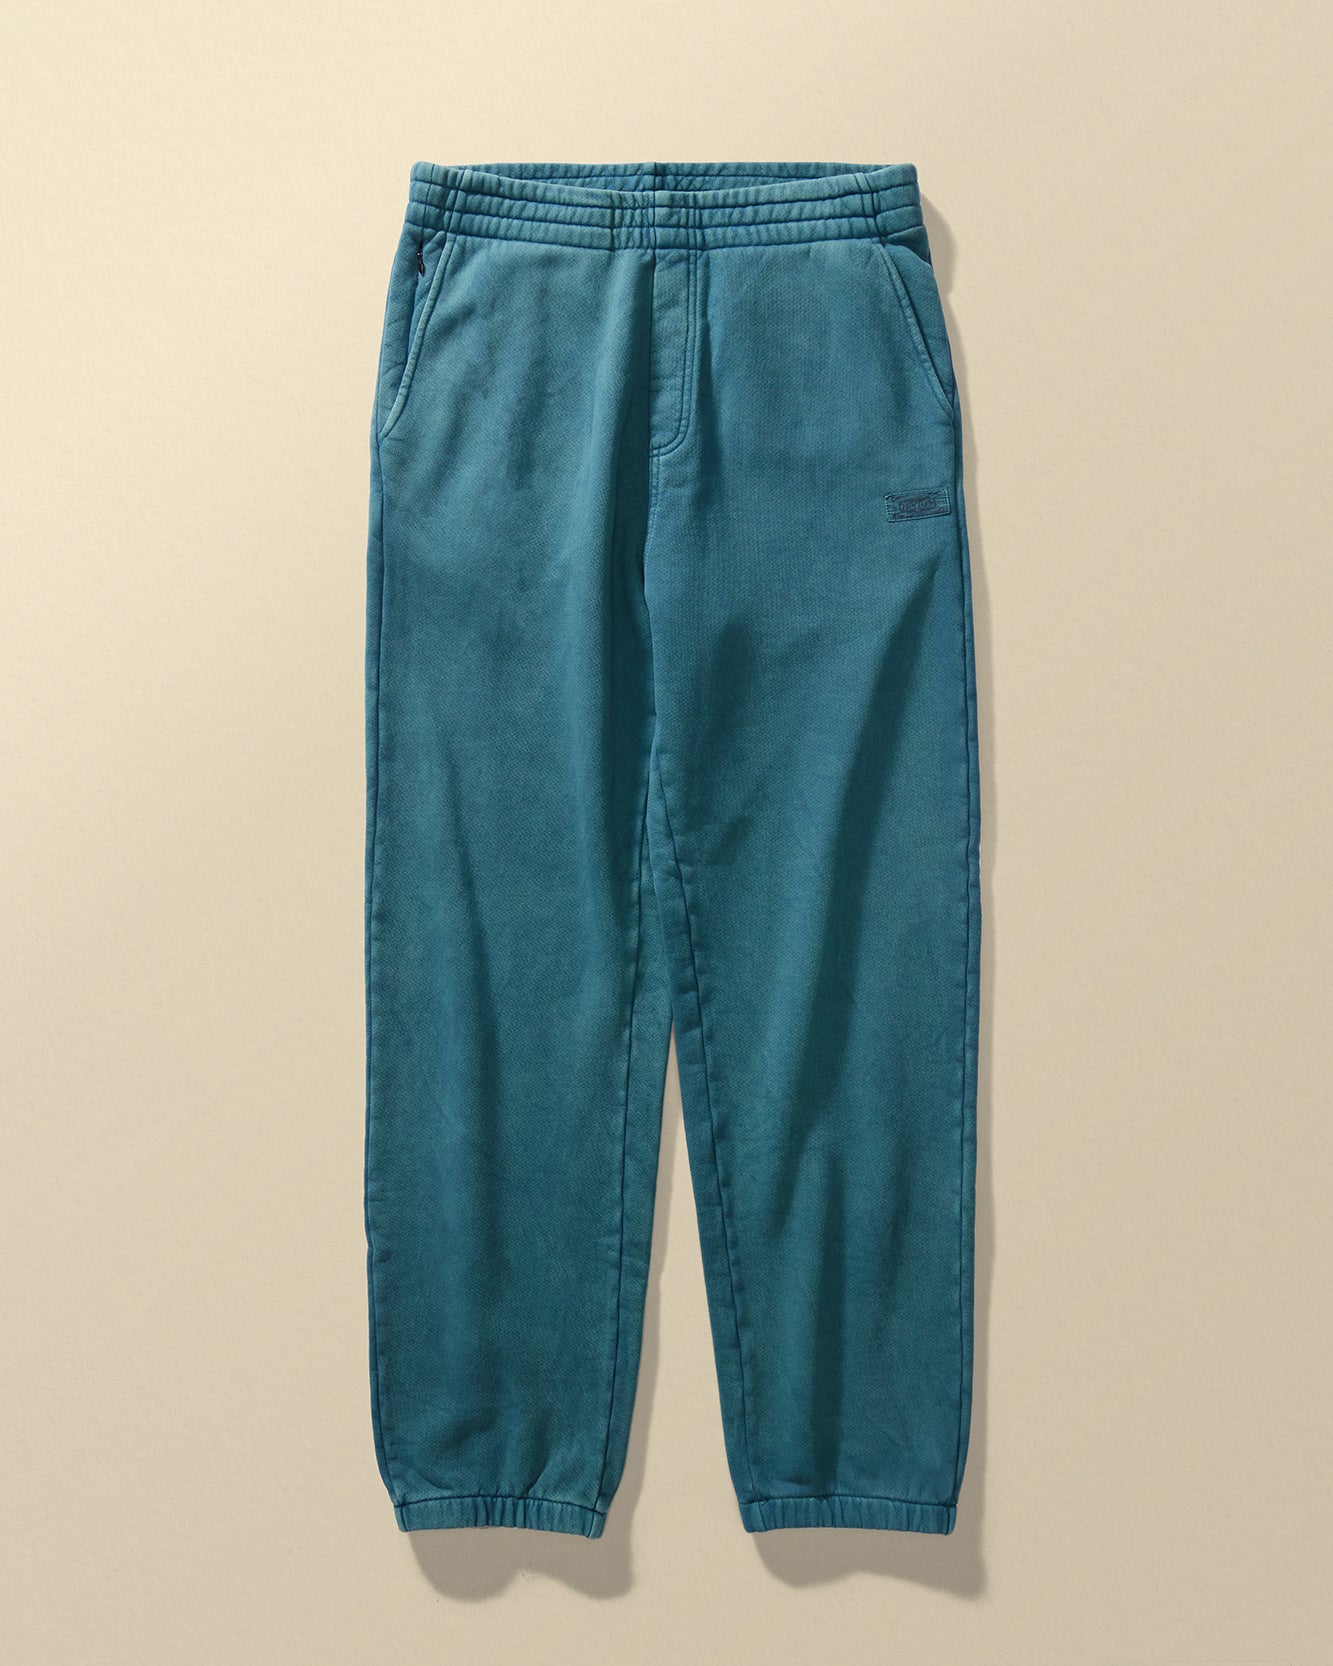 Fleetwood French Terry Sweatpant